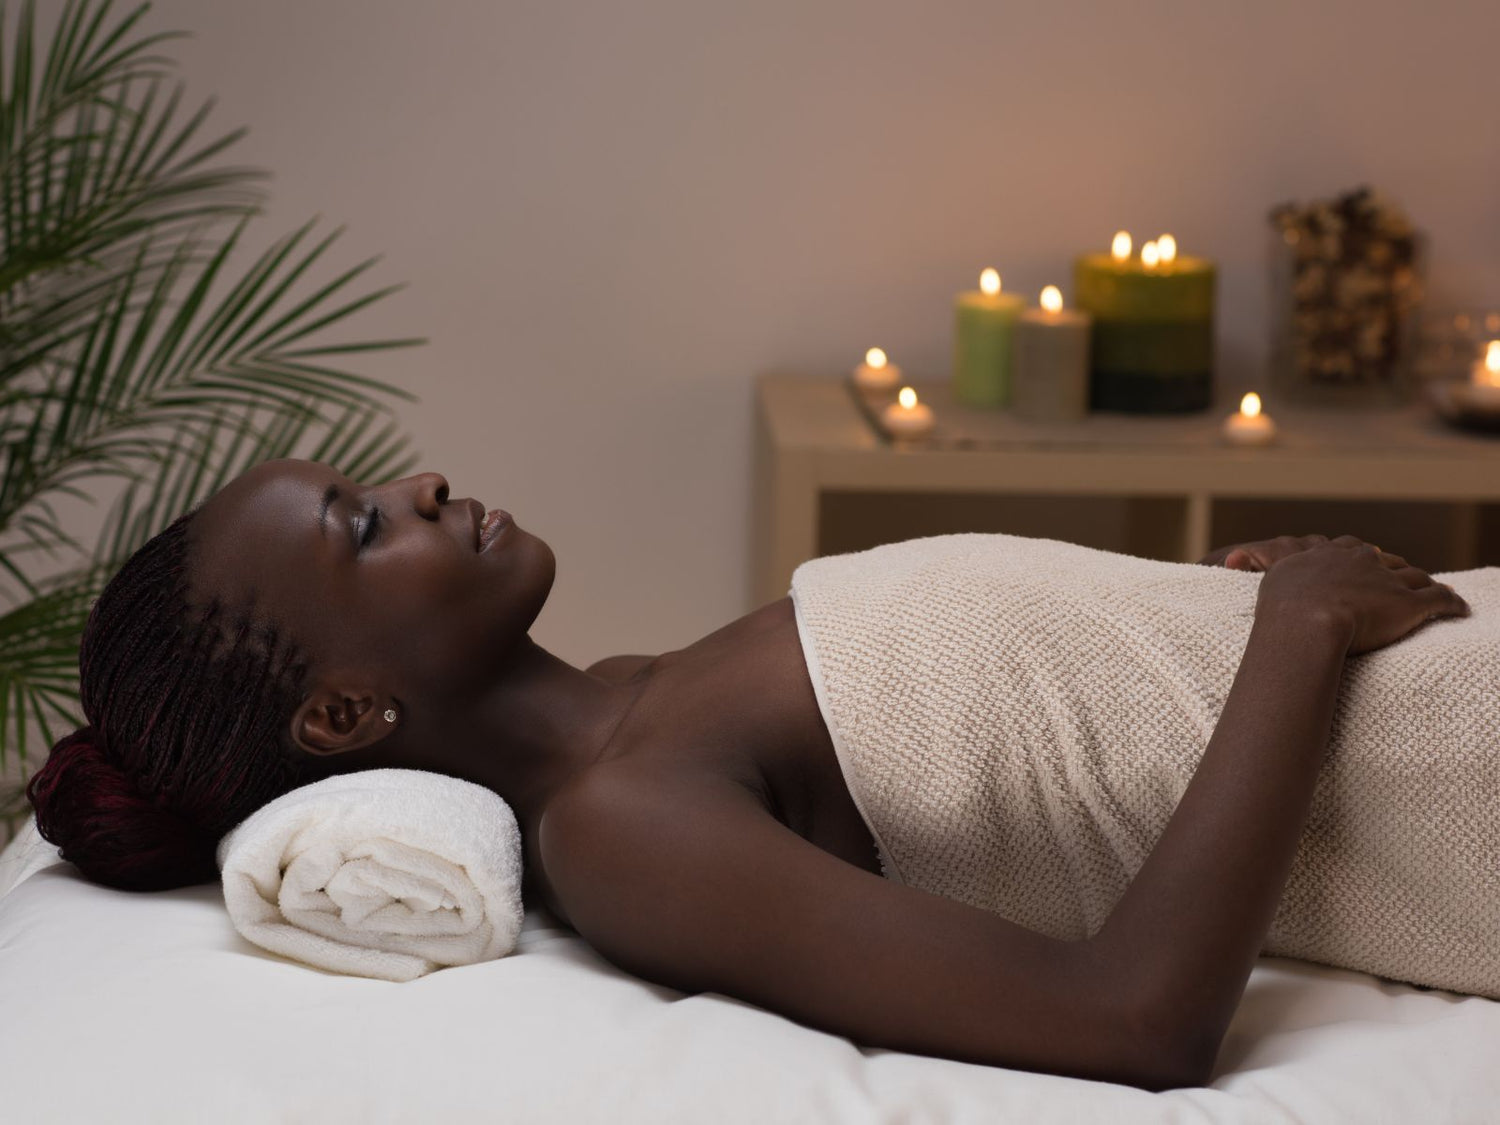 Best scented candles promote wellness like a day spa